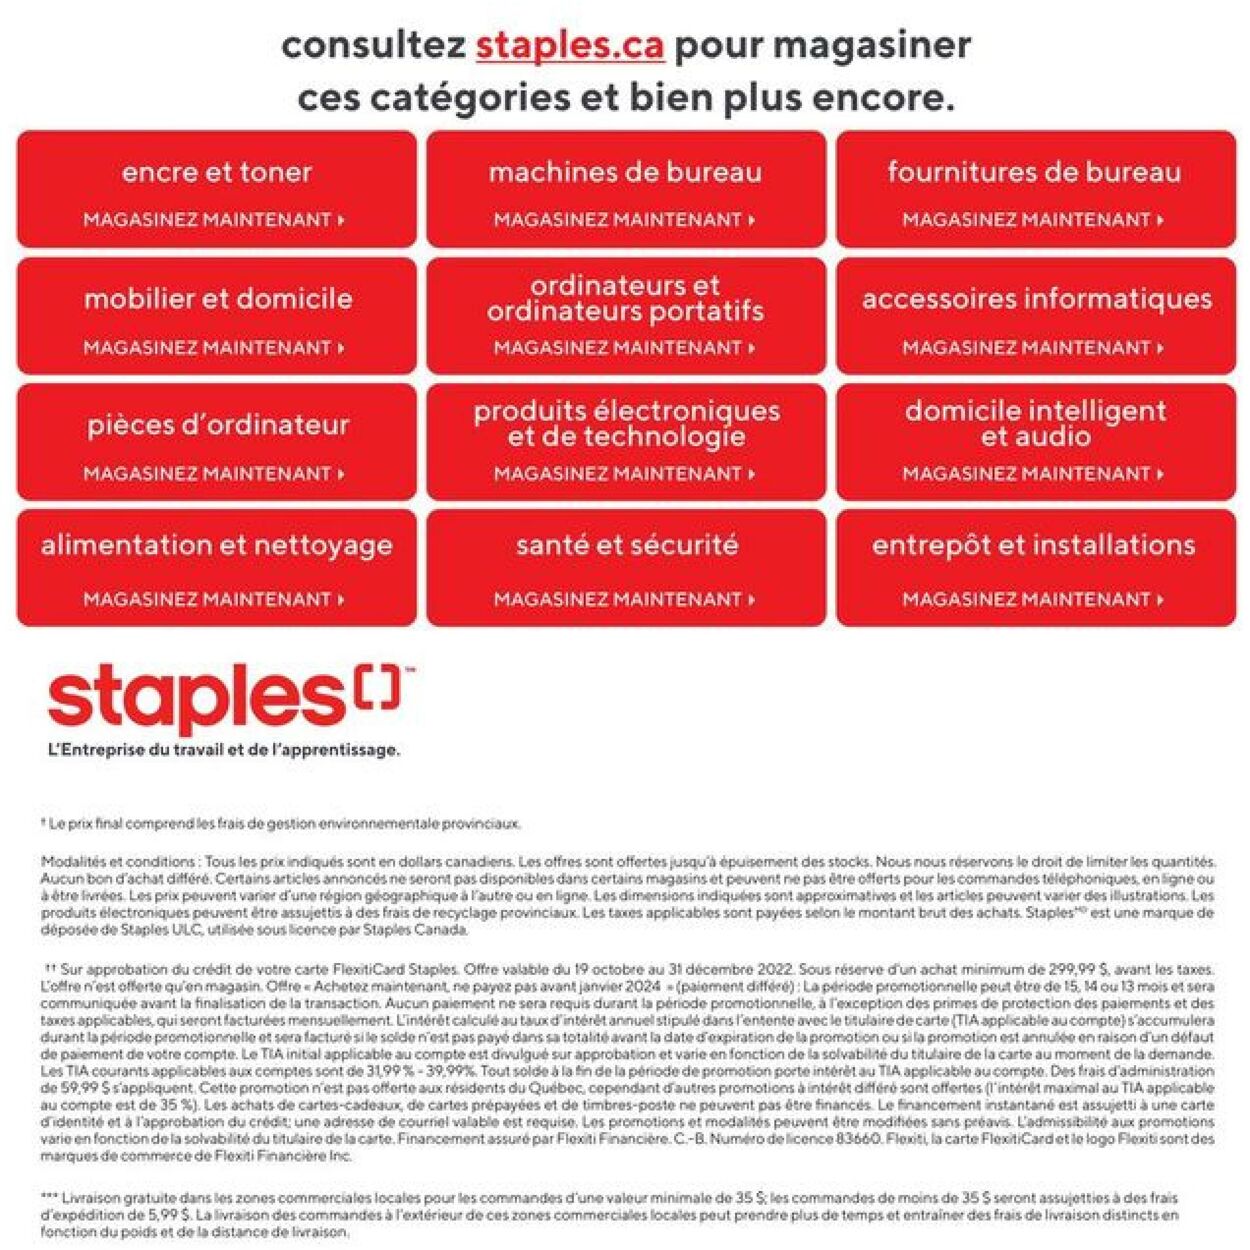 Circulaire Staples 02.11.2022 - 08.11.2022